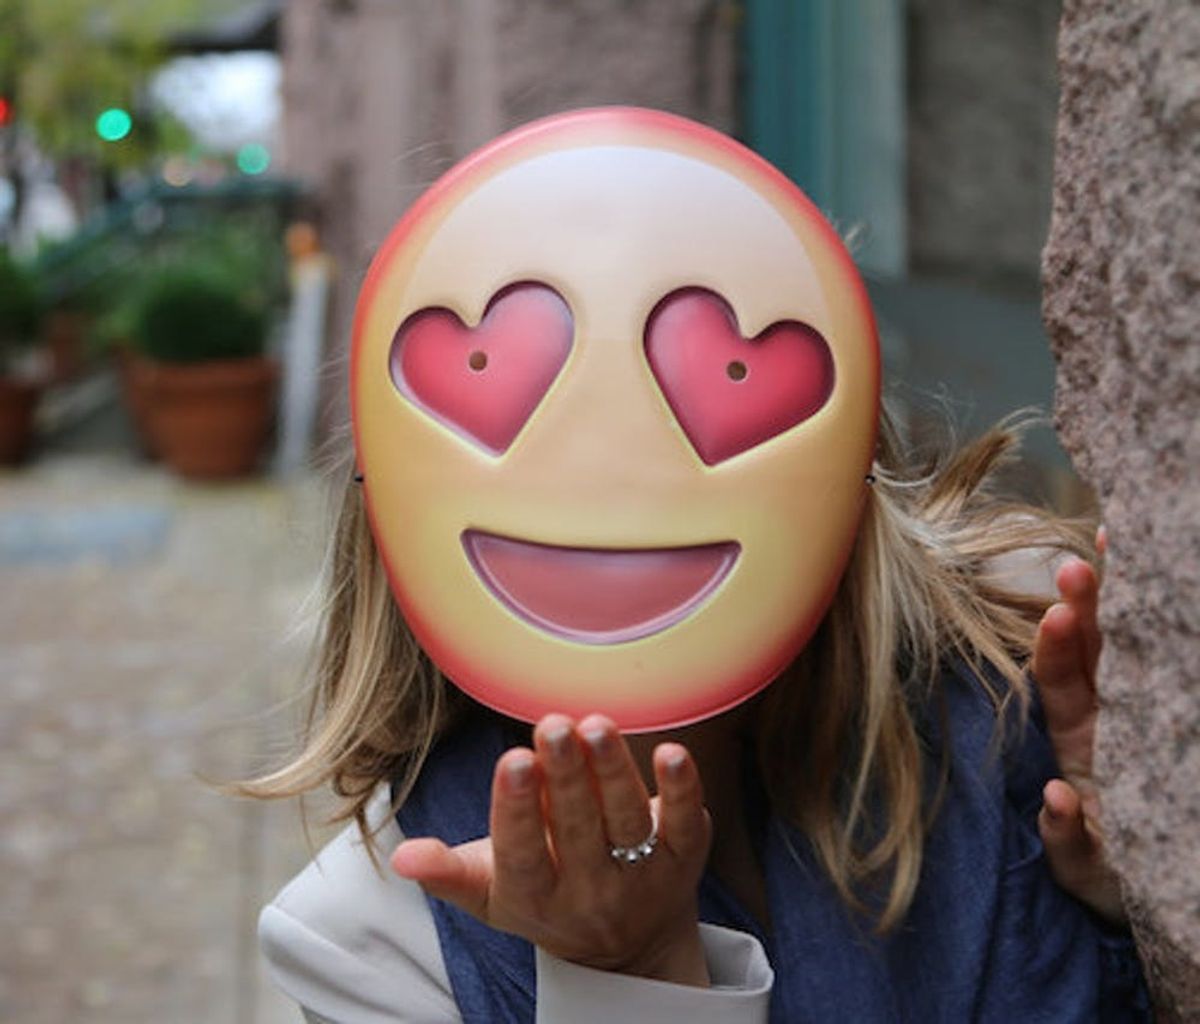 These $5 Emoji Masks Are the Easiest Halloween Costume EVER